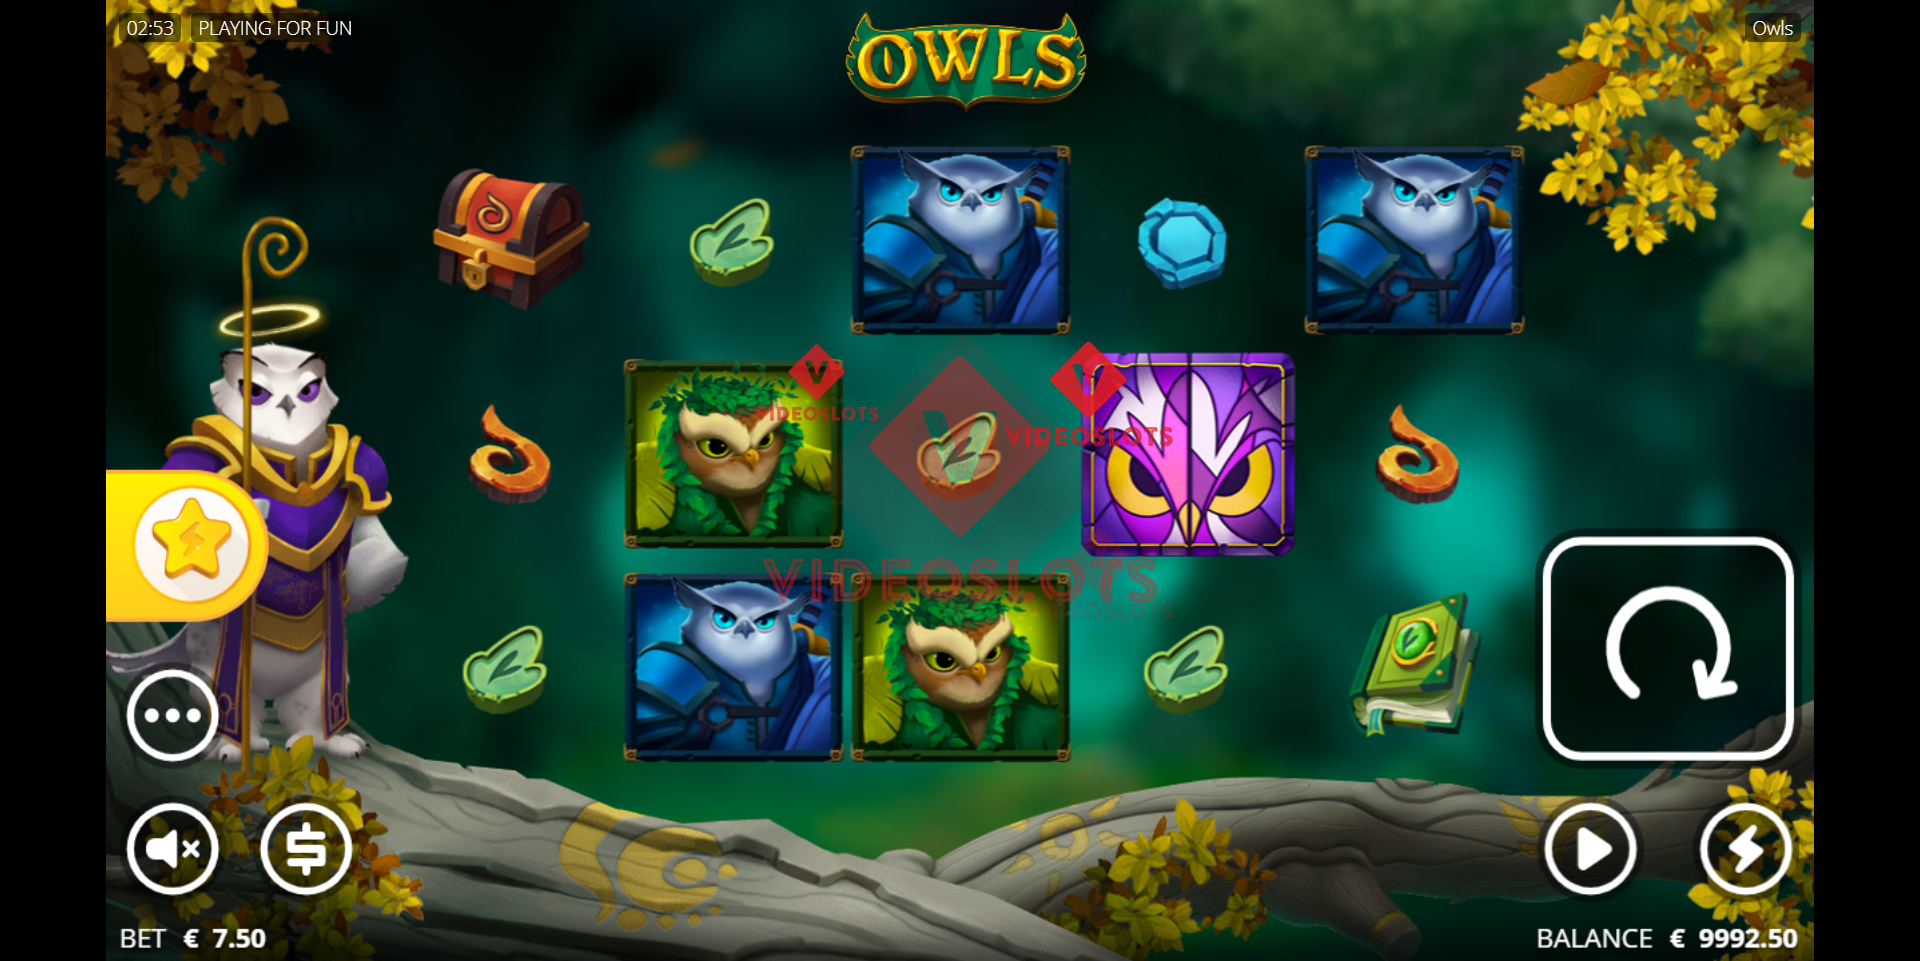 Base Game for Owls slot from NoLimit City